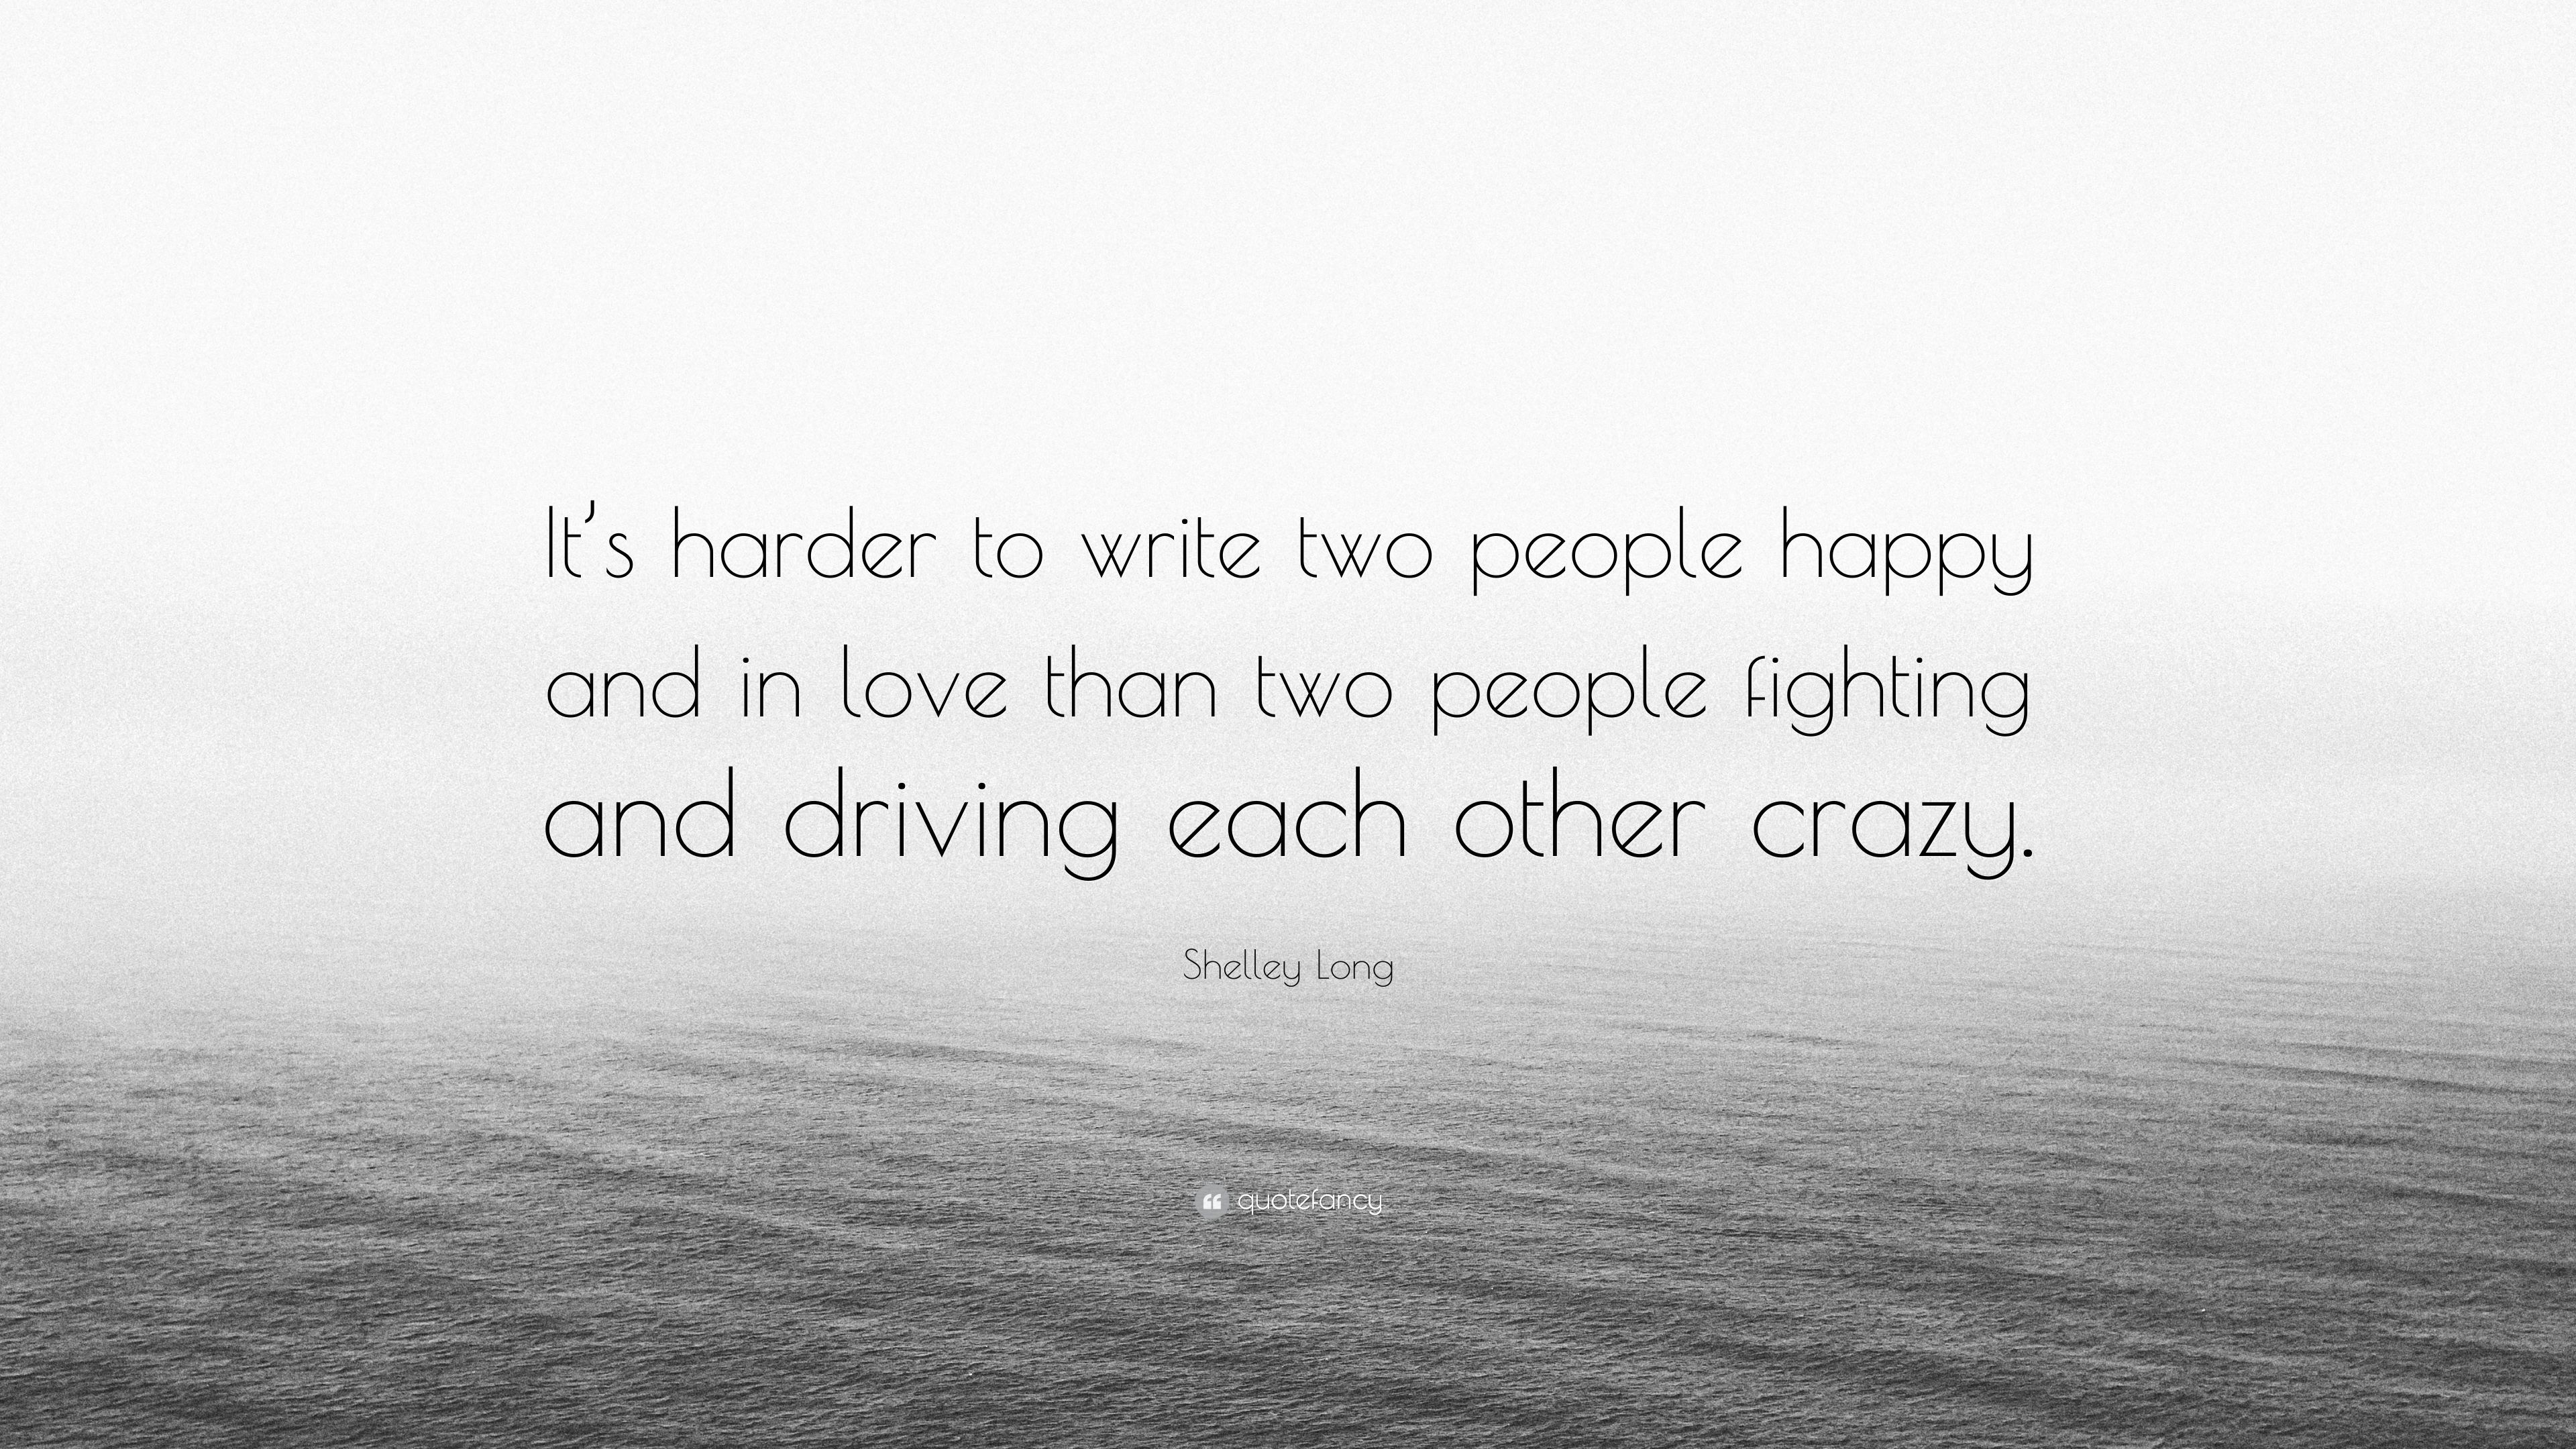 Shelley Long Quote: "It's harder to write two people happy and in ...